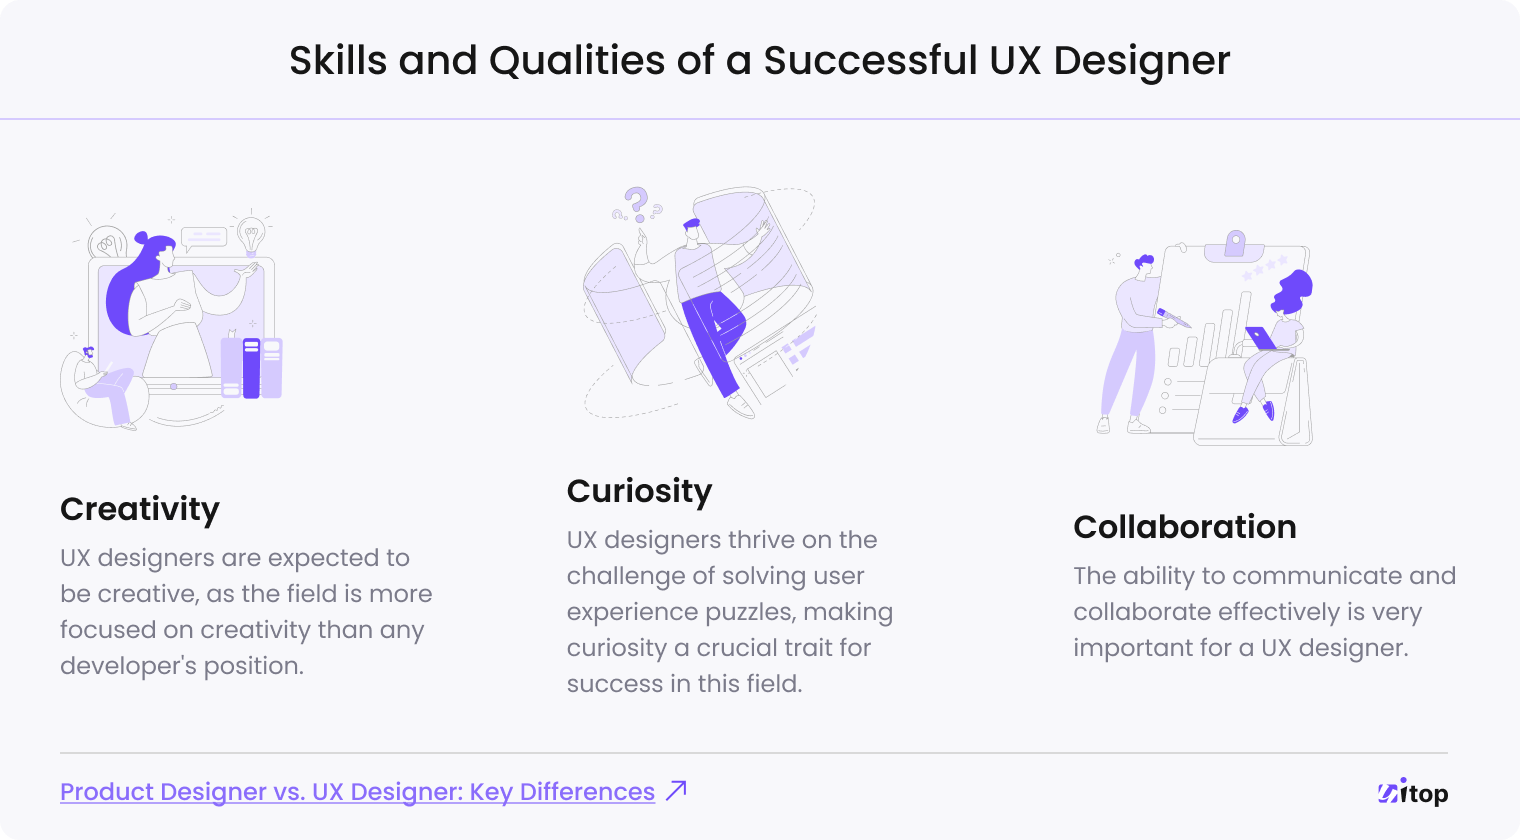 Skills and qualities of a successful UX designer